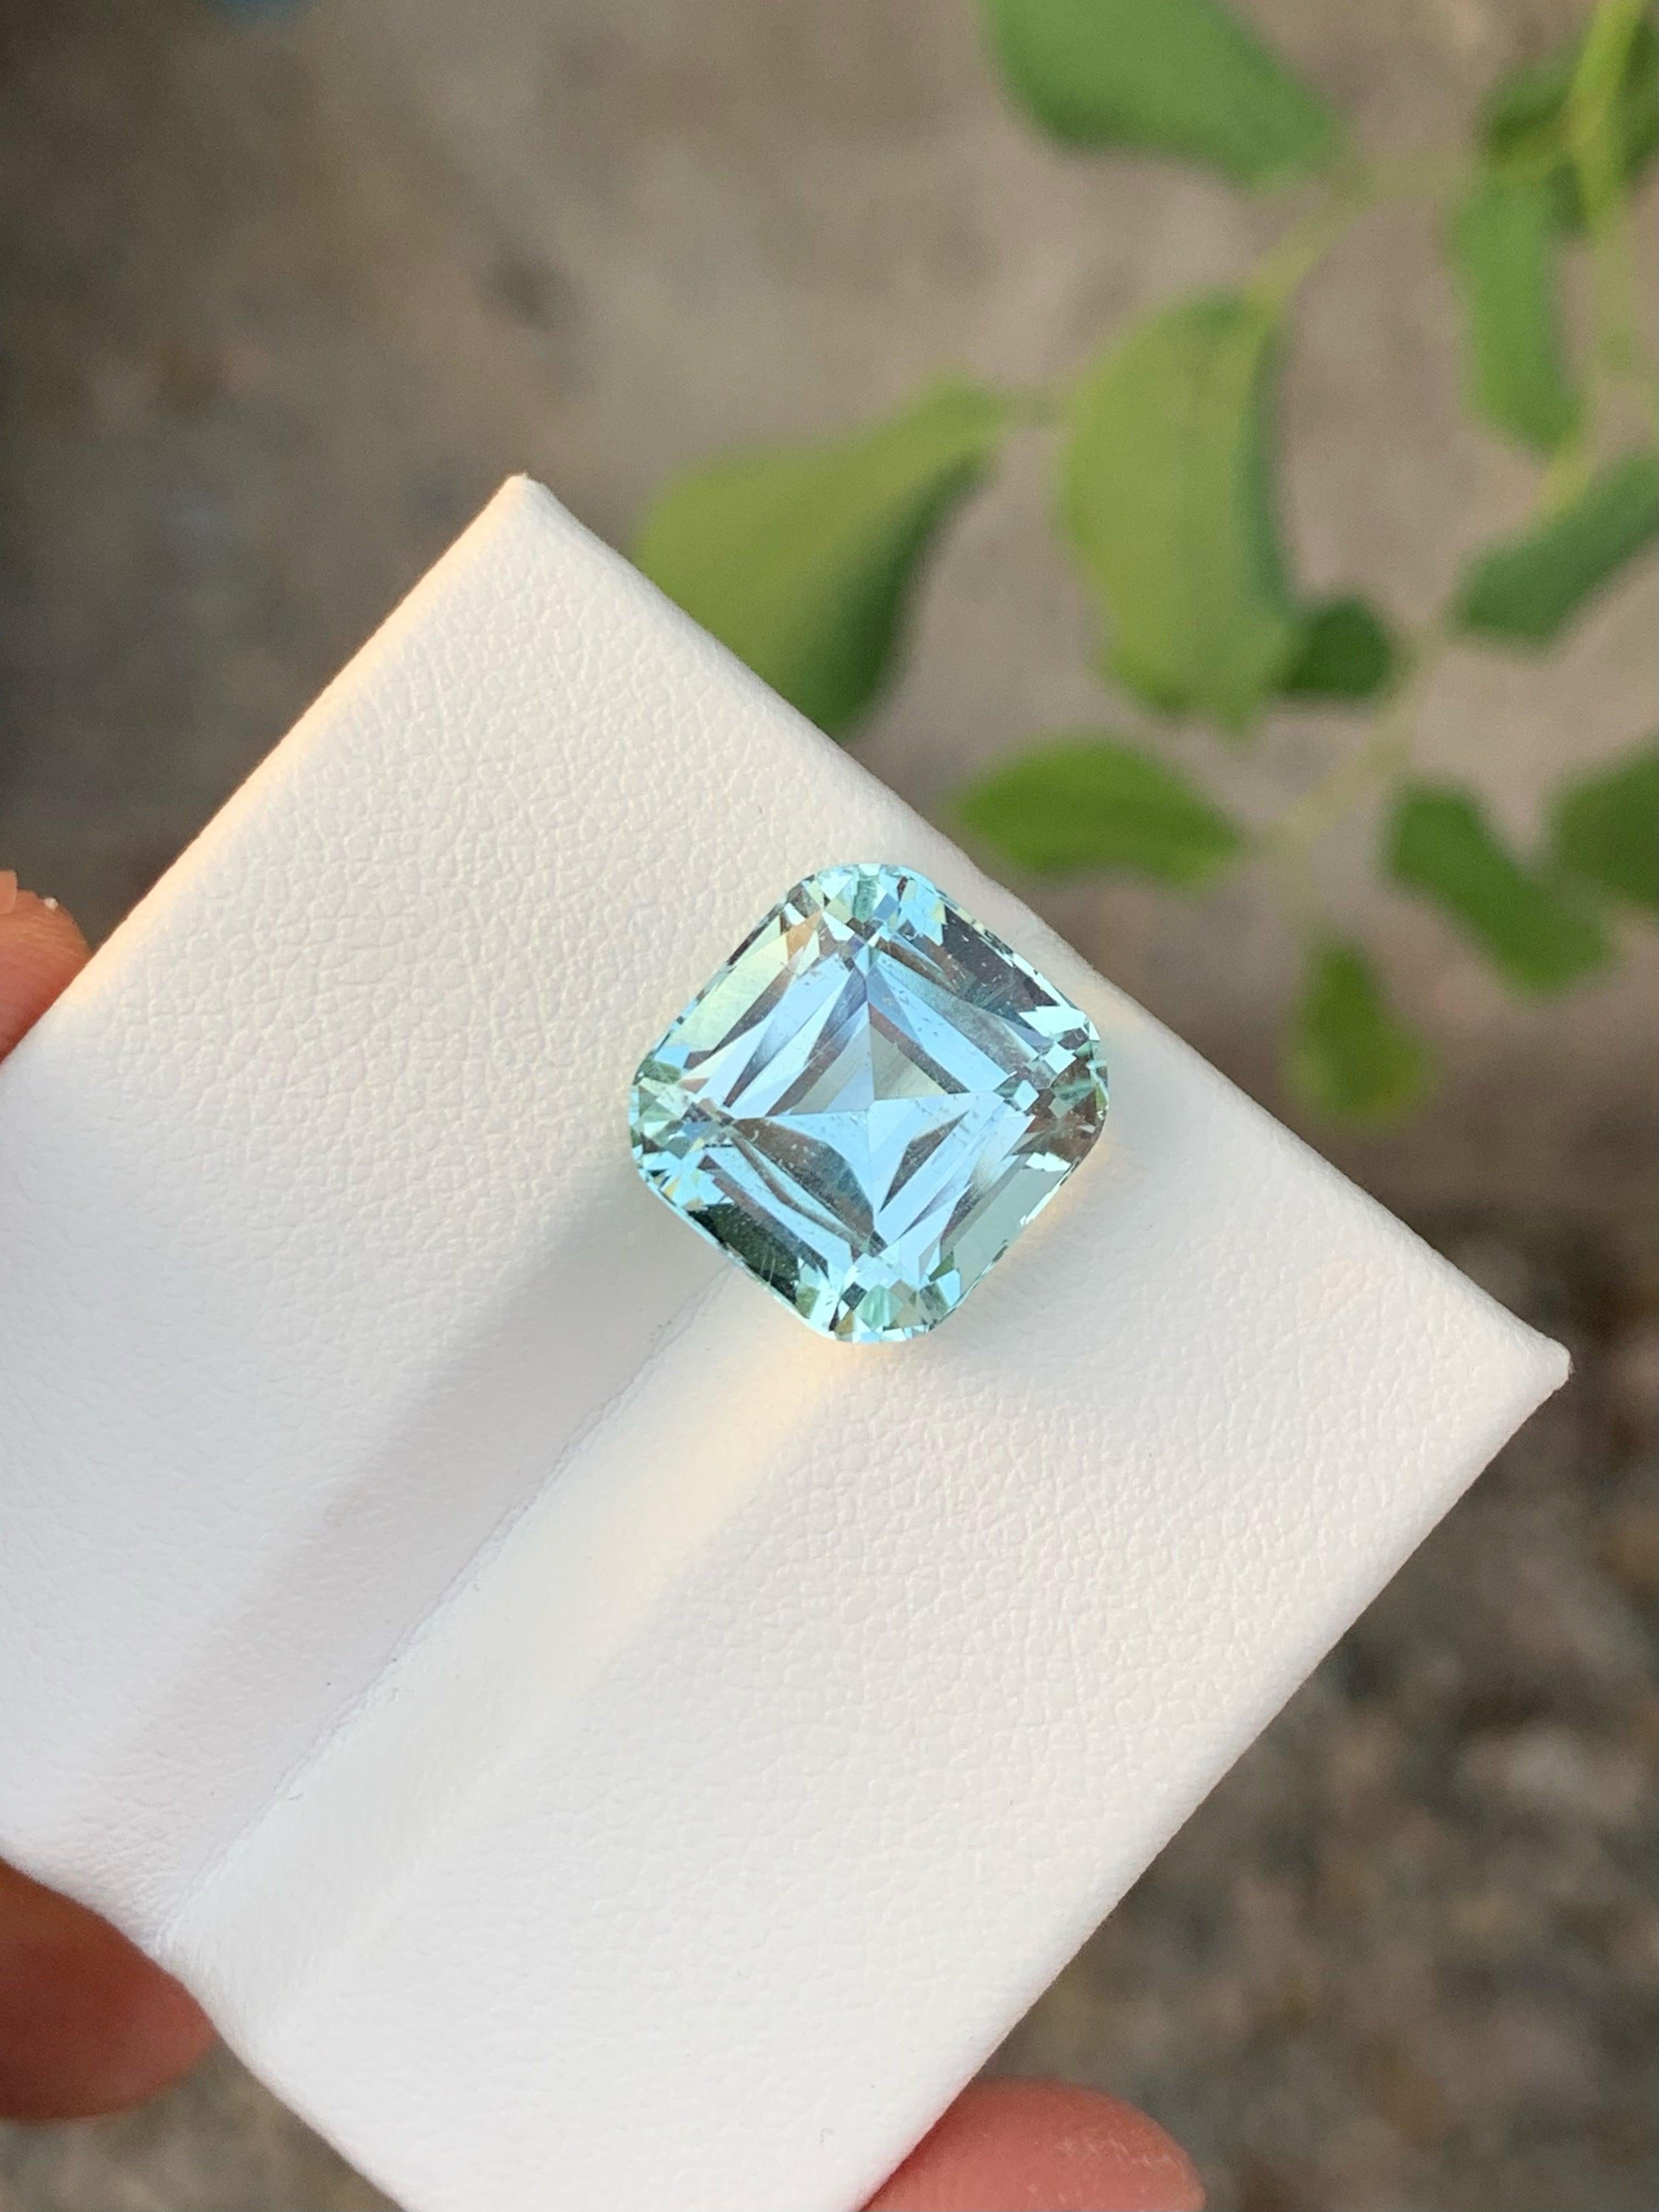 Excellent Natural Aquamarine From Pakistan of 8.80 carats from Pakistan has a wonderful cut in a Cushion shape, incredible Light-Blue color, Great brilliance. This gem is VVS Clarity.

Product Information:
GEMSTONE NAME: Excellent Natural Aquamarine